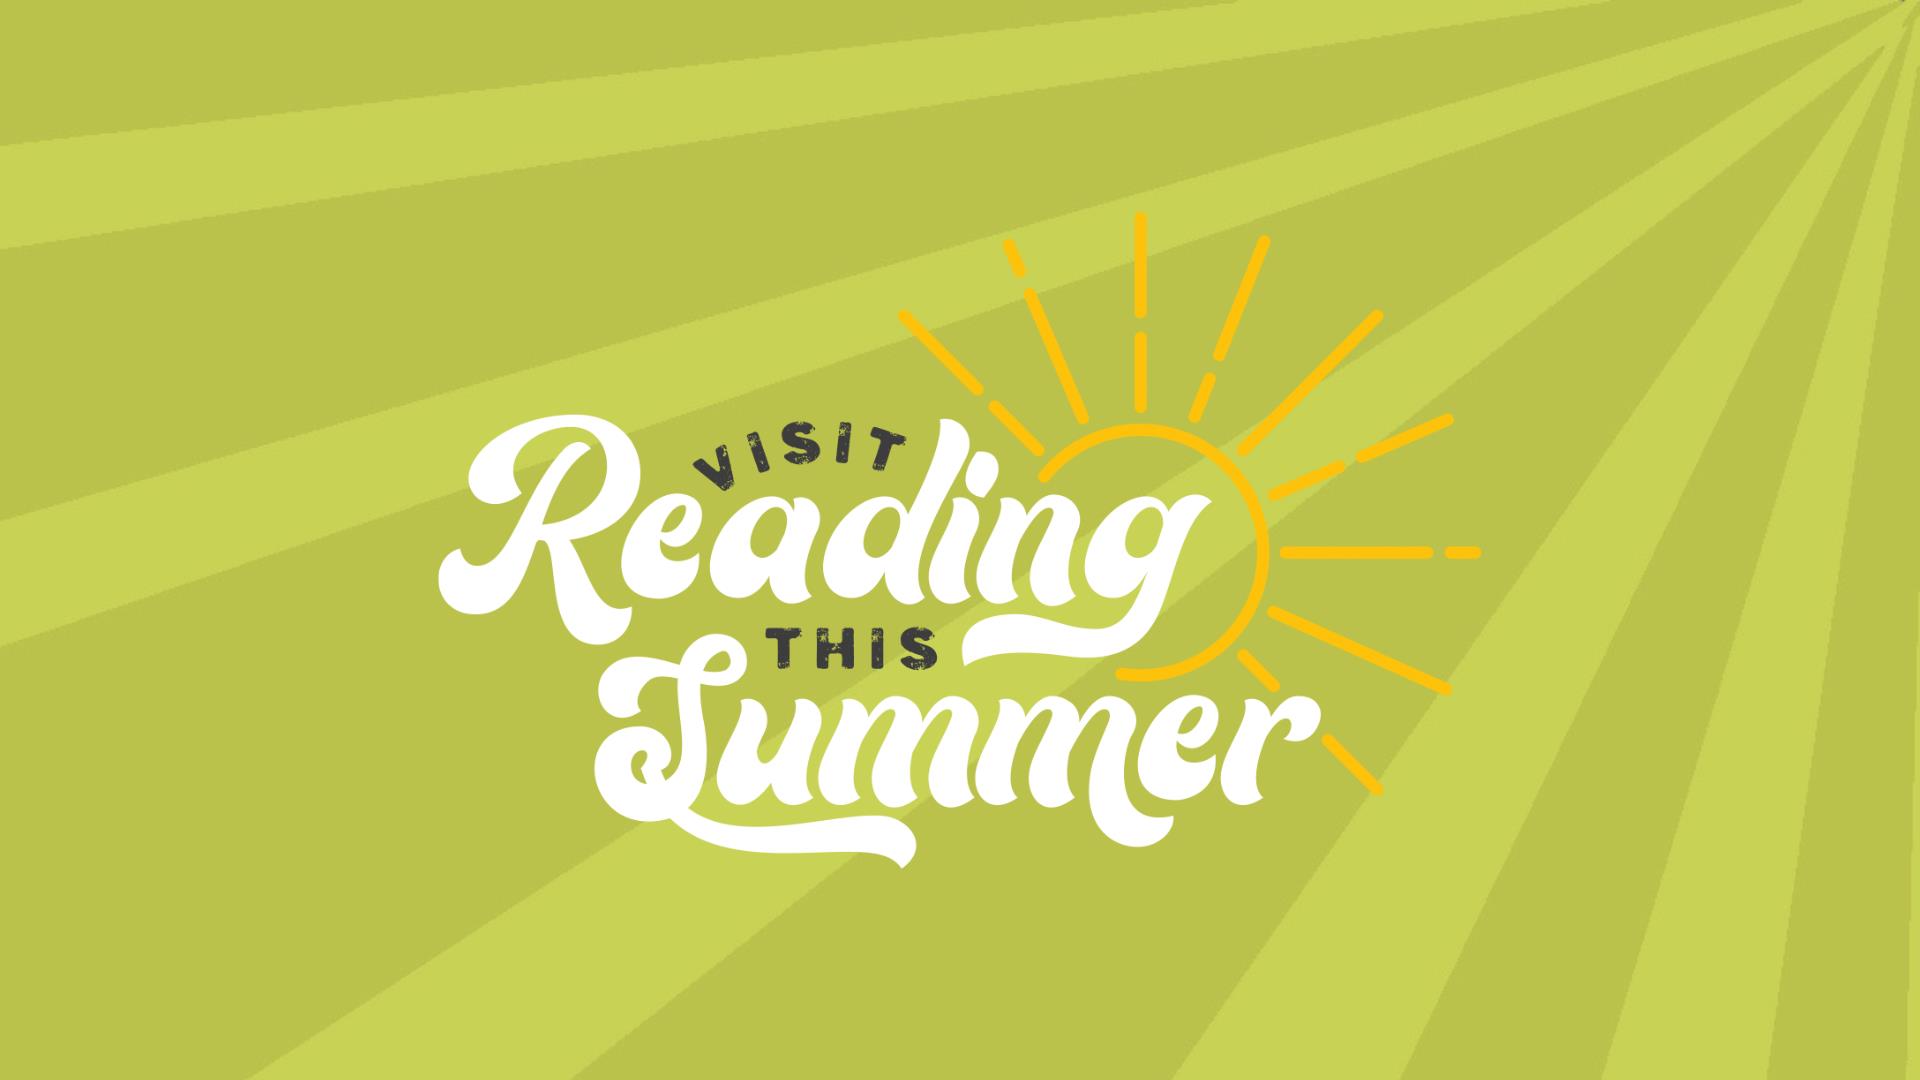 Graphic with text: Visit Reading this Summer